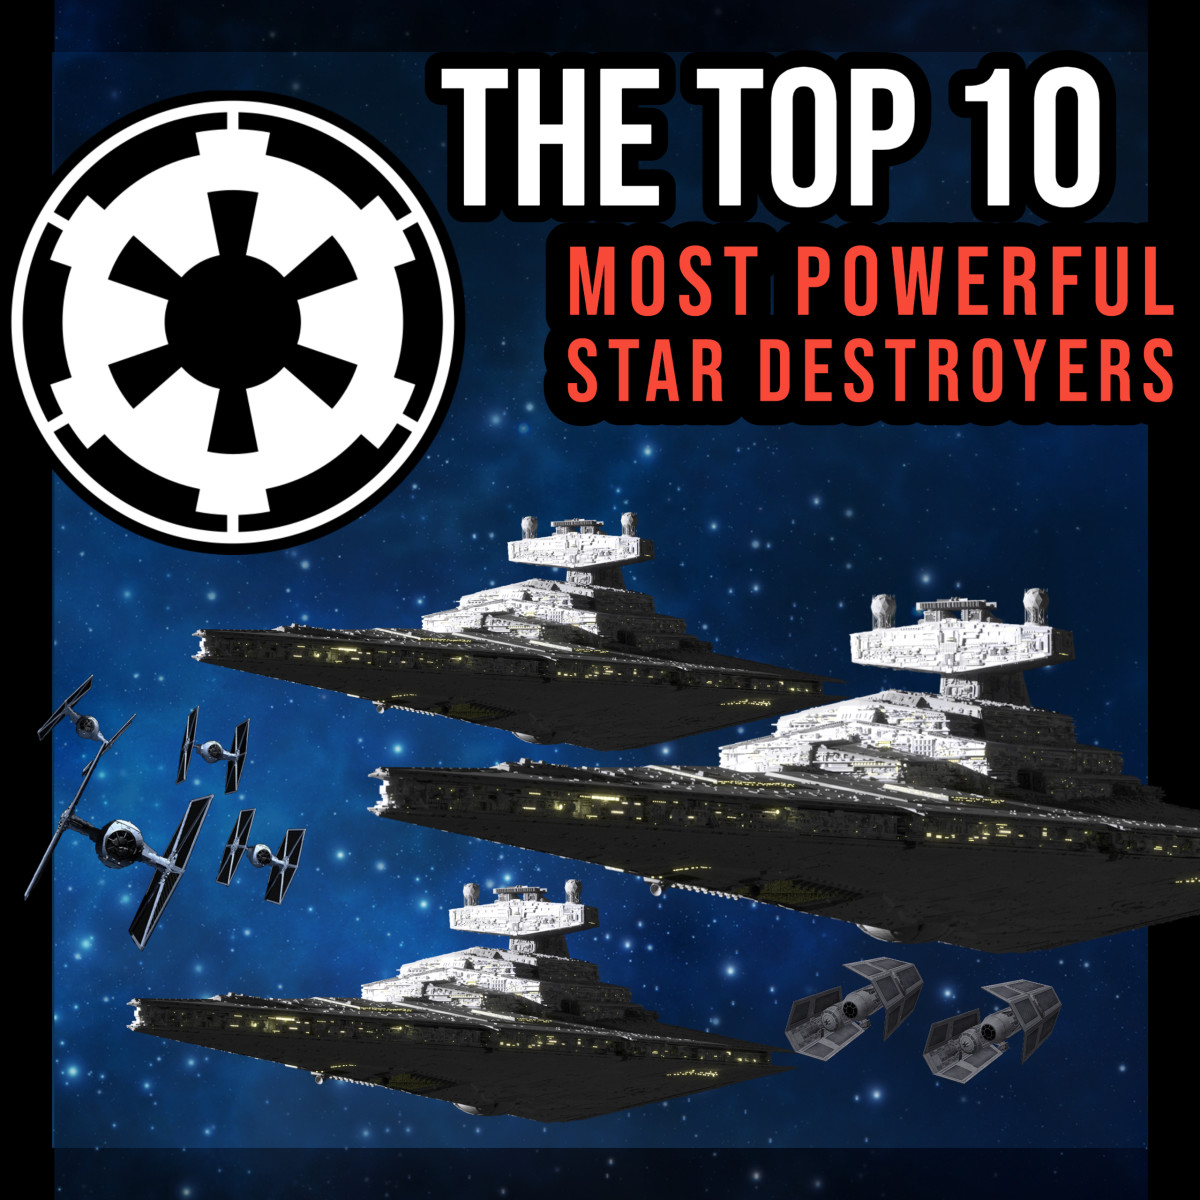 The Top 10 Most Powerful Star Destroyers